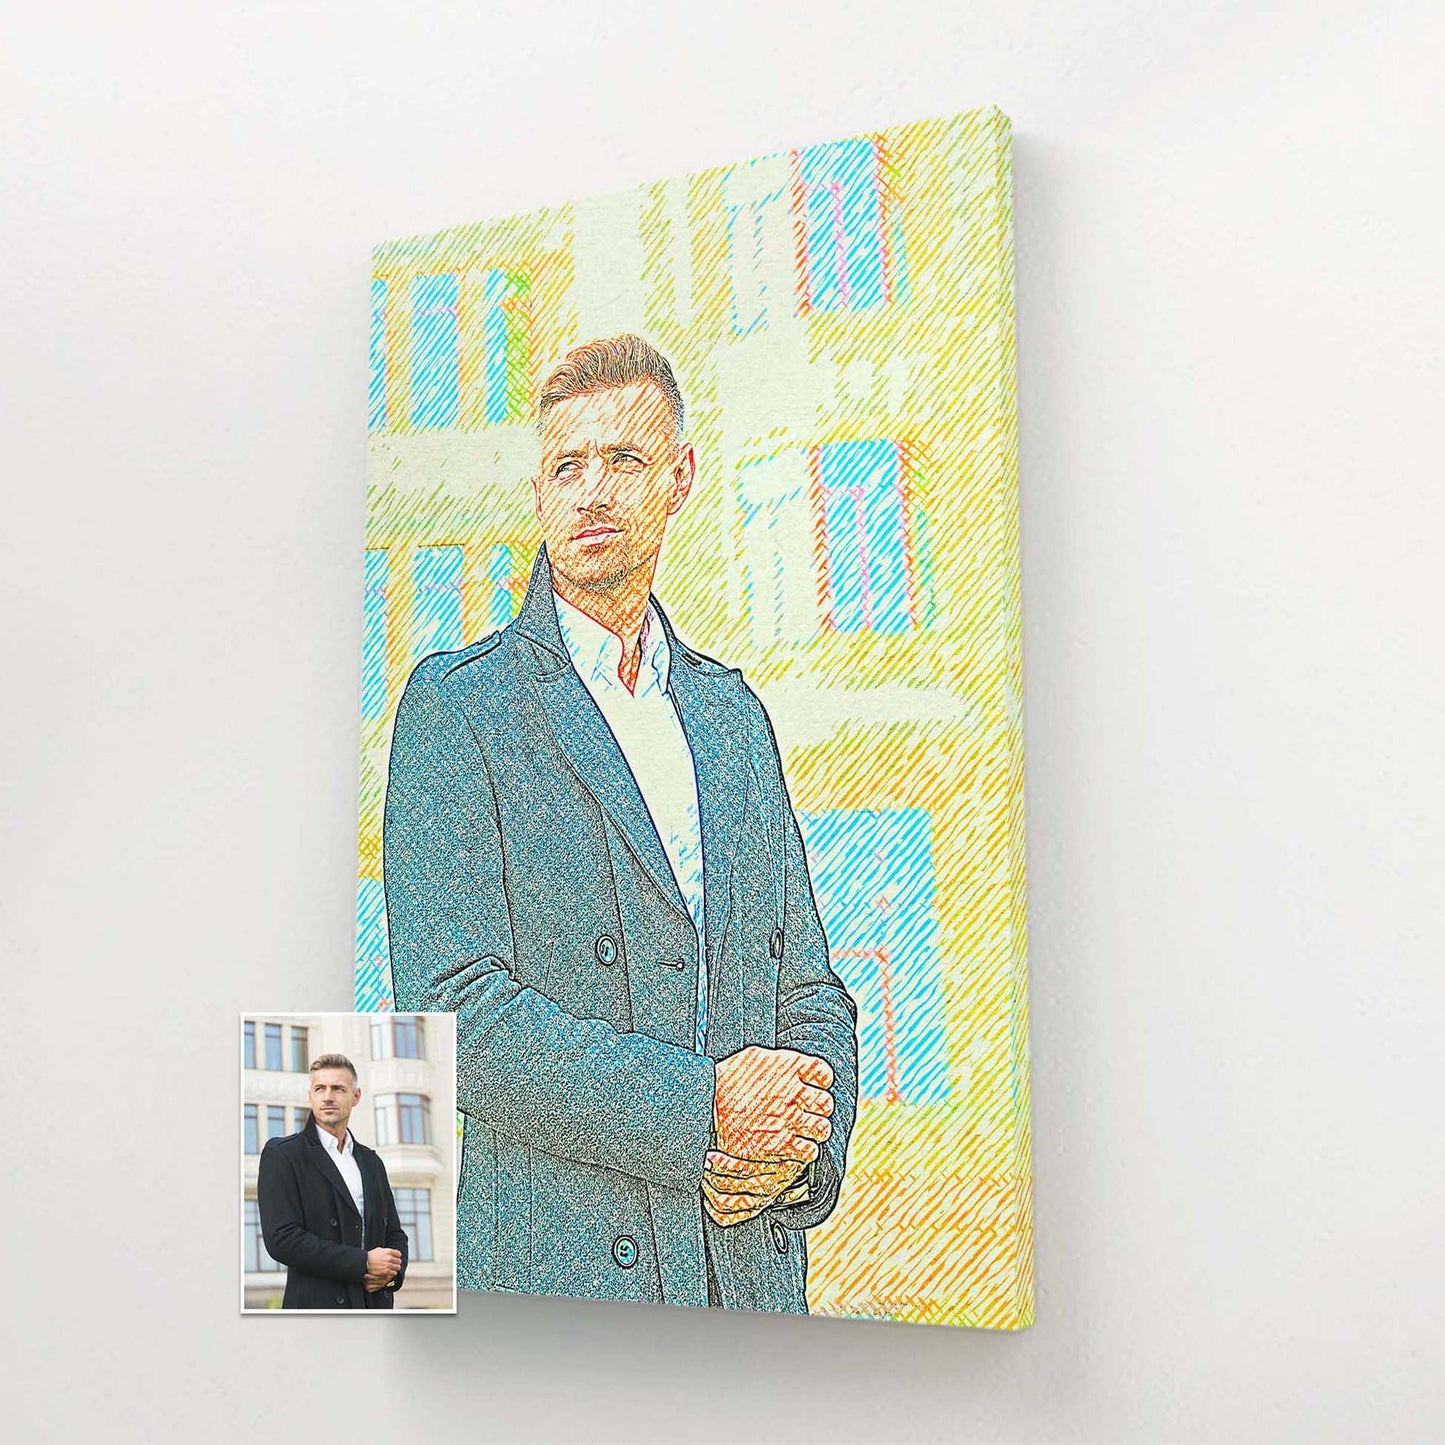 Add a touch of artistry to your decor with our Personalised Drawing Crosshatch Canvas. We transform your photo into a stunning piece of original artwork, printed on a handmade woven canvas